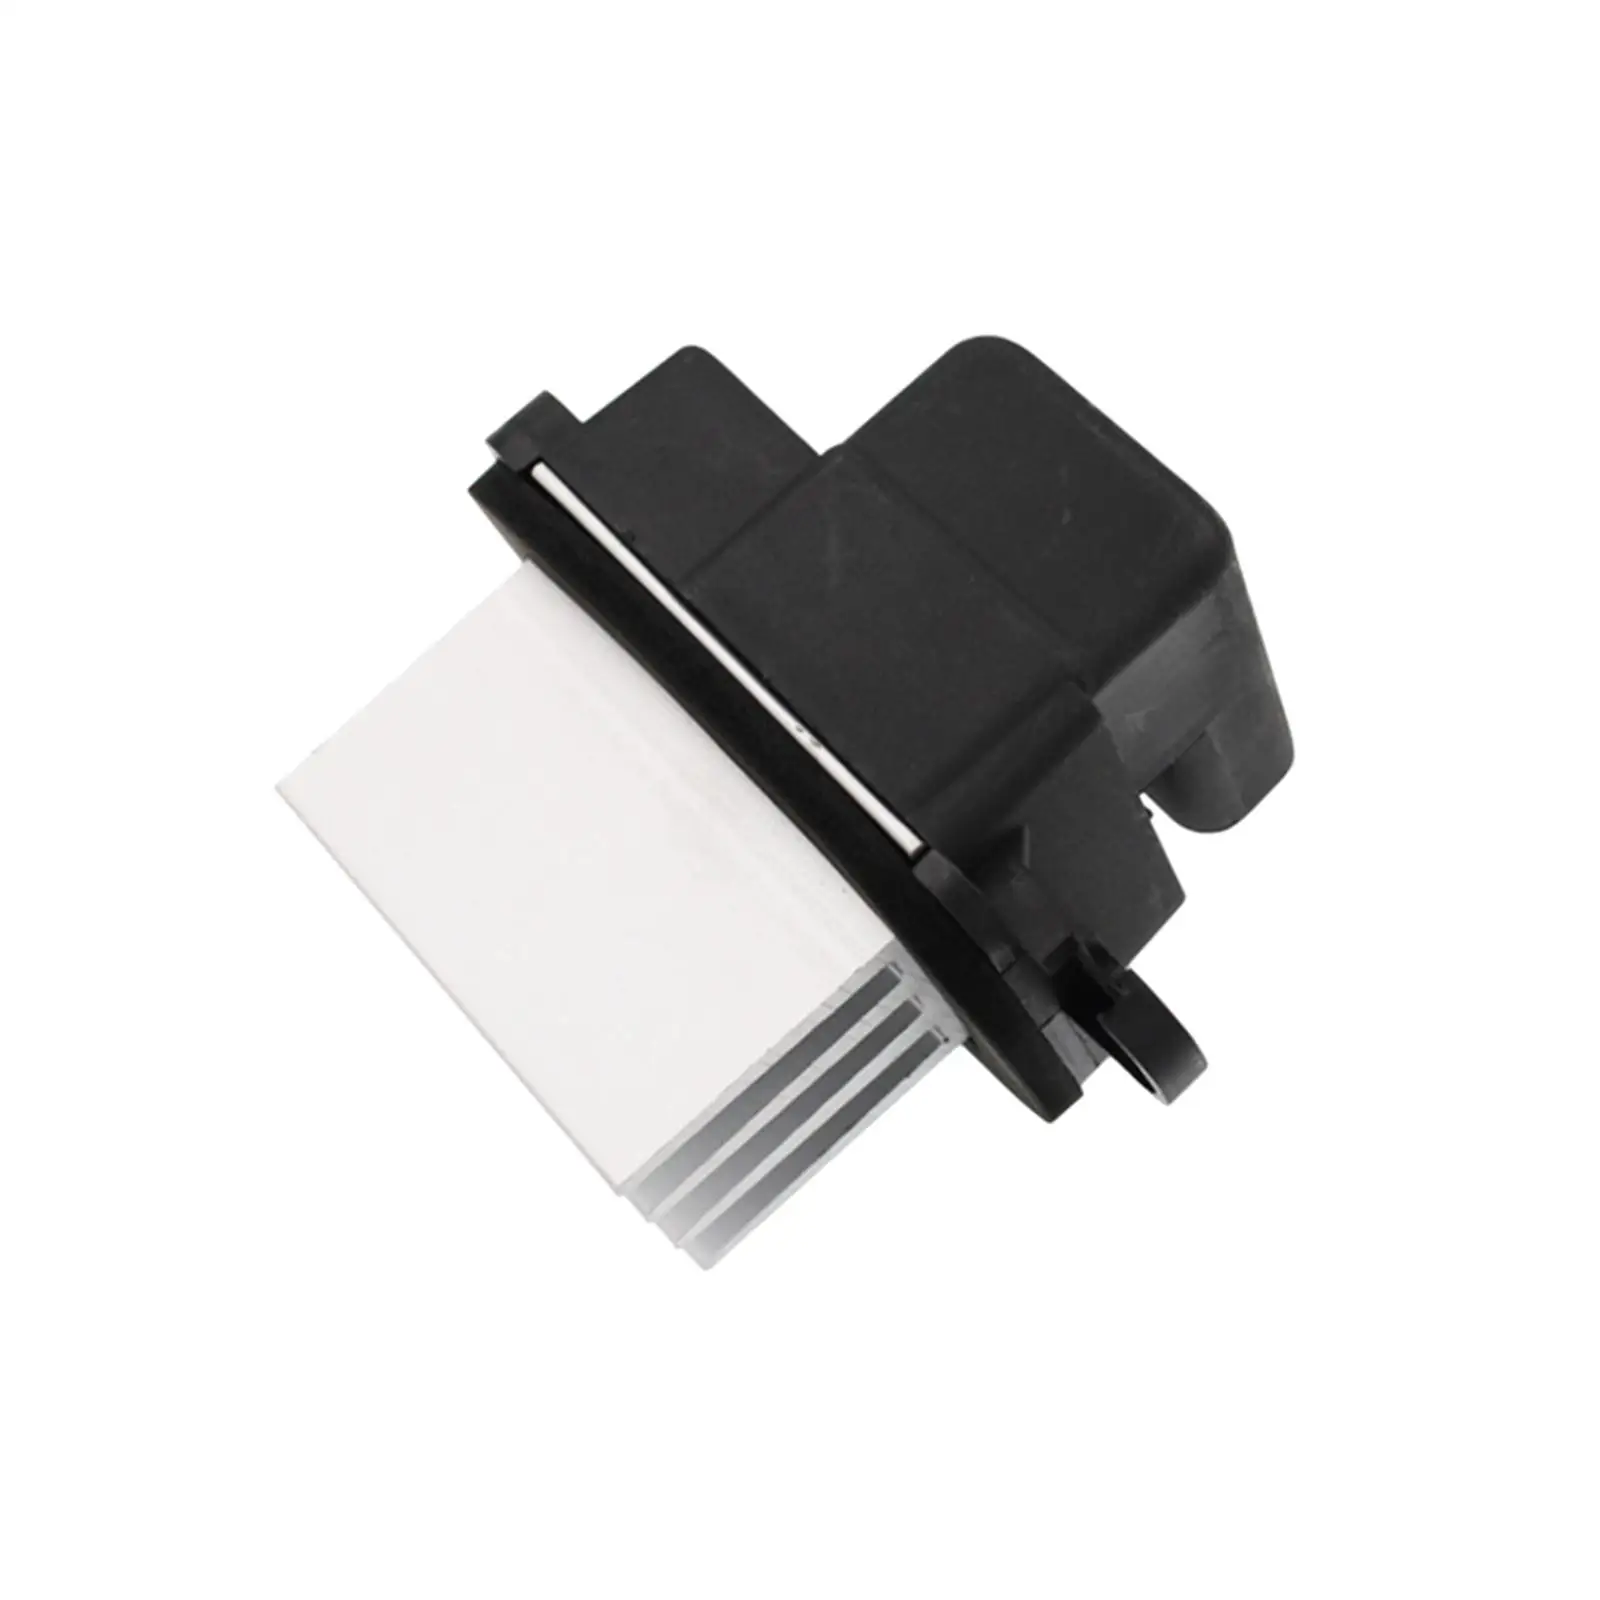 Replacement Blower Resistor Replace 27151zm70A Sturdy for Nissan Quest 2004-2009